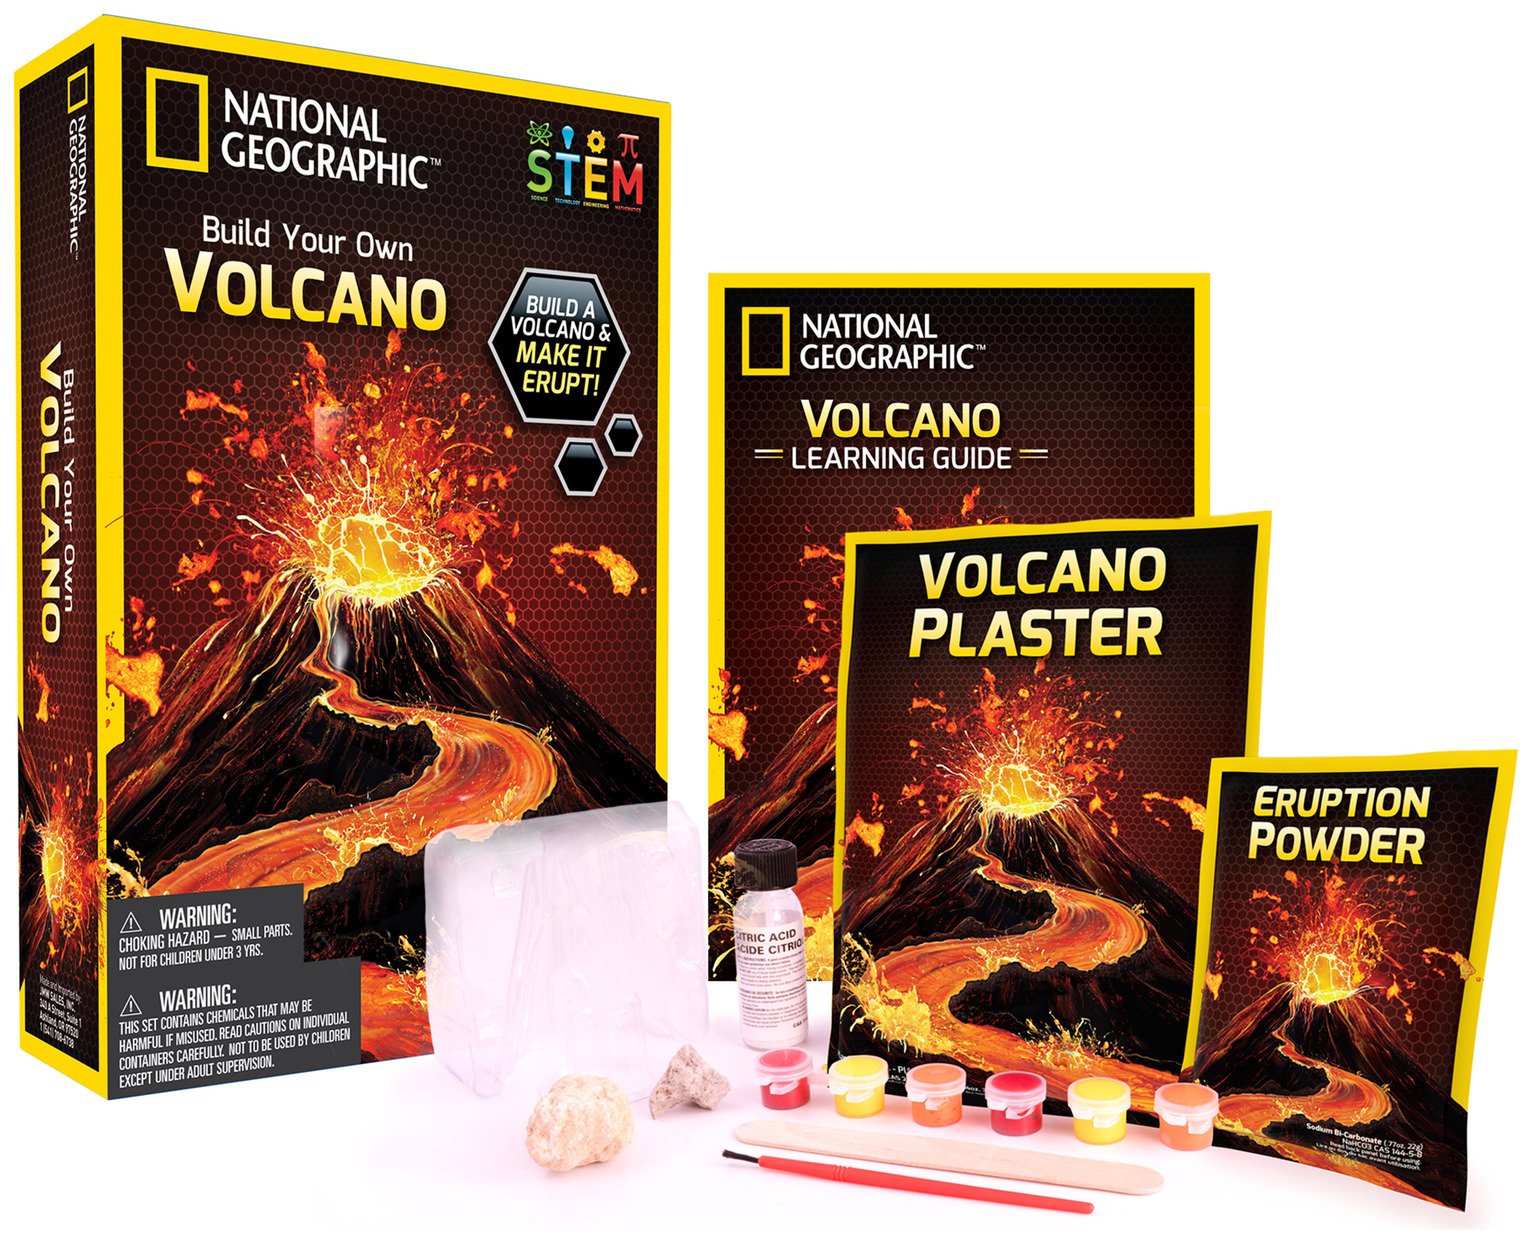 volcano toys for 4 year olds